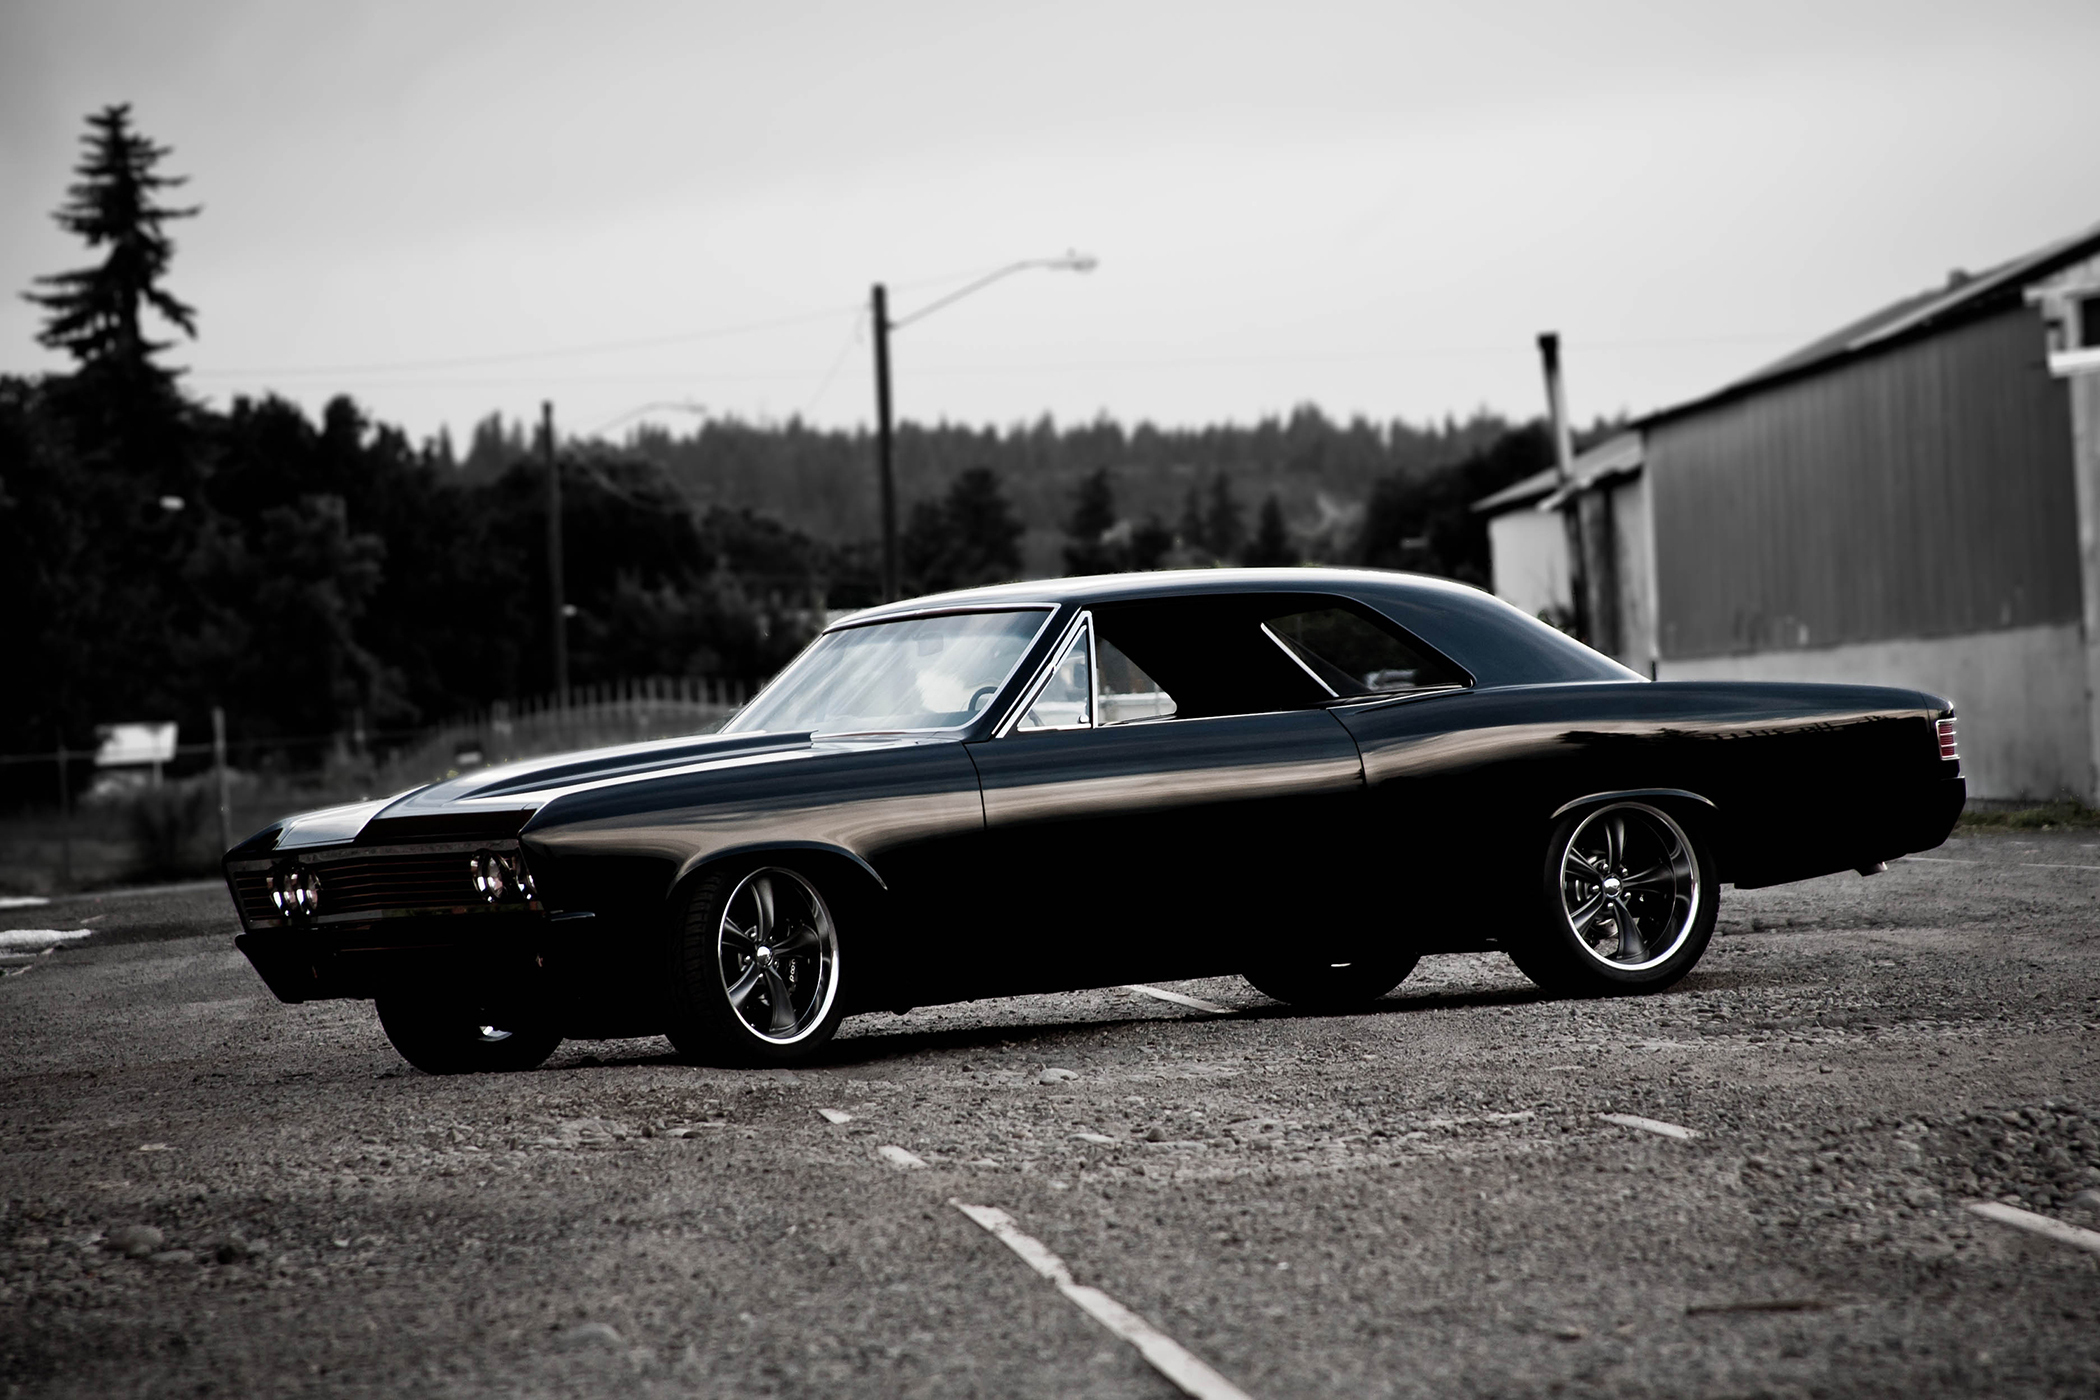 chevrolet, Chevelle, Ss, 1967, Chevy, Hot rod, Muscle car, Classic car, Custom Wallpaper